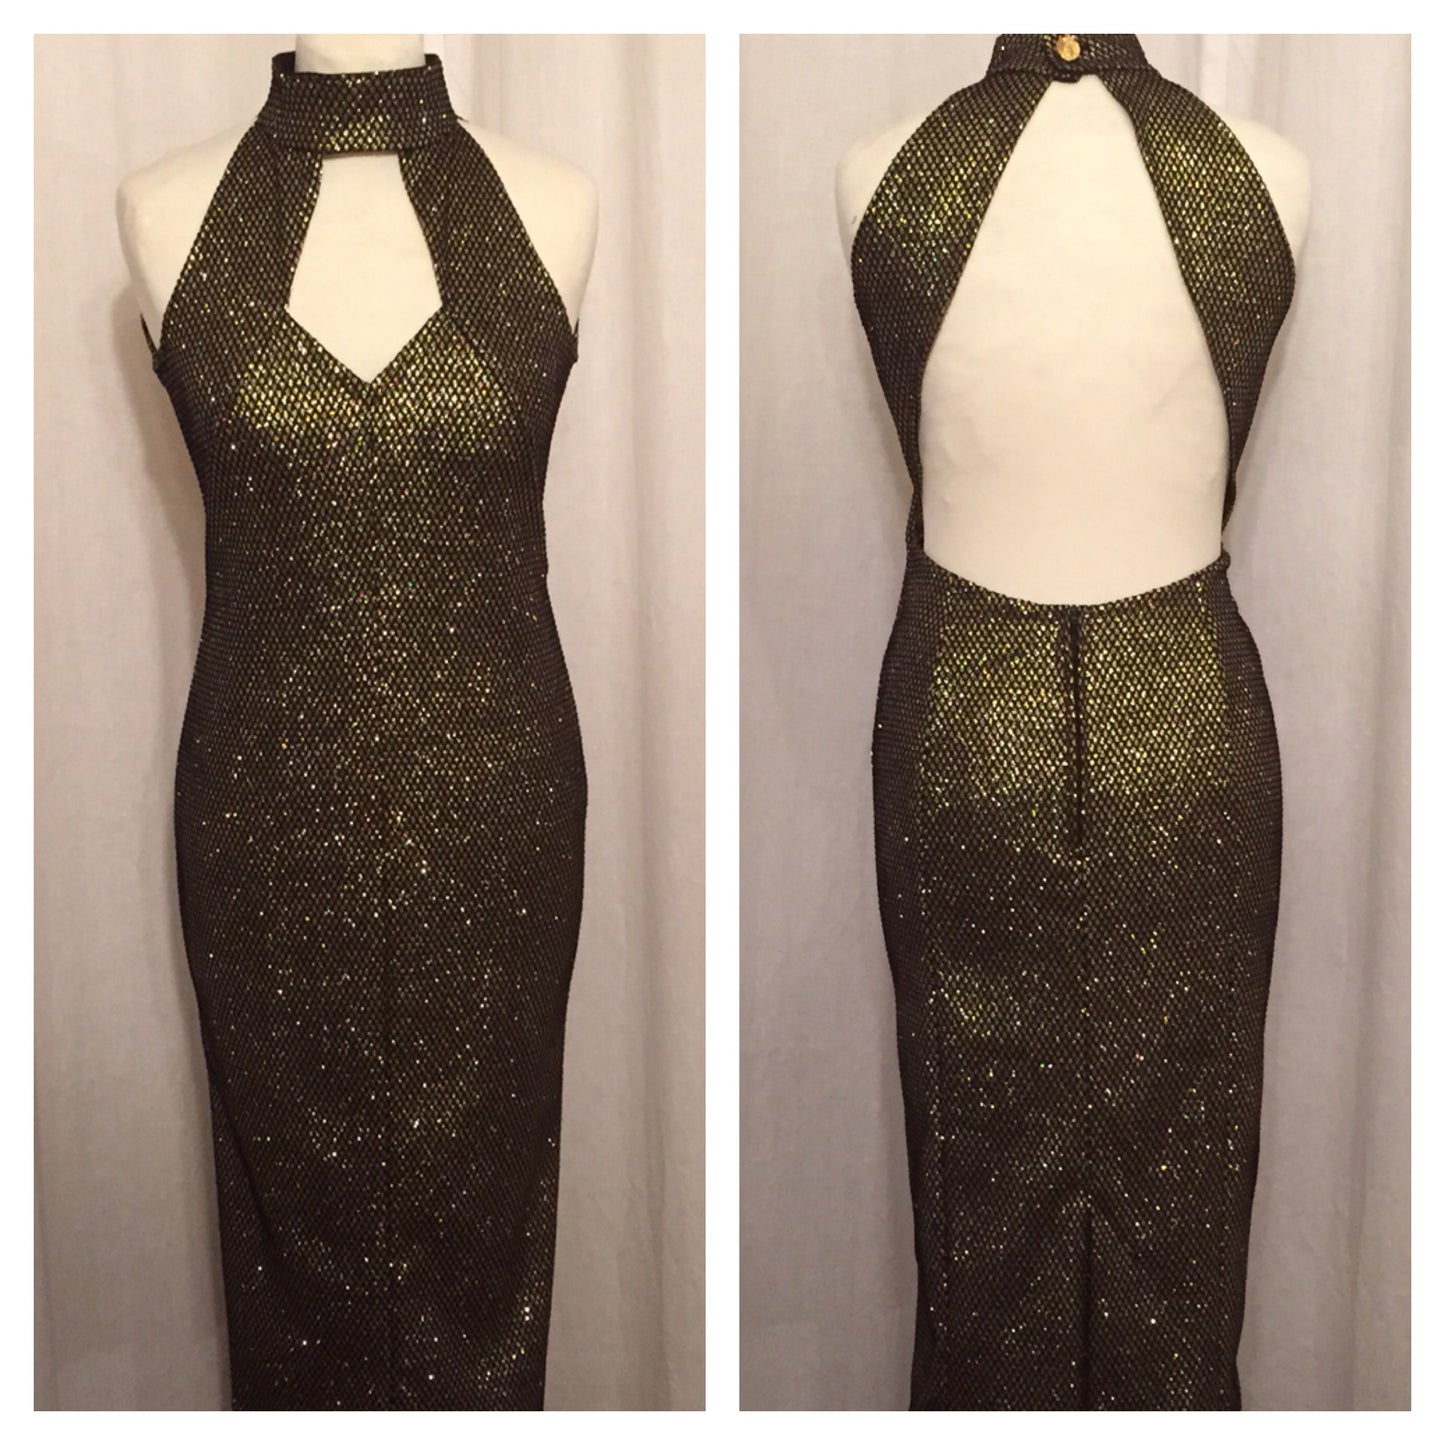 Vintage 1950s style gold lurex and black net backless wiggle dress M XL only